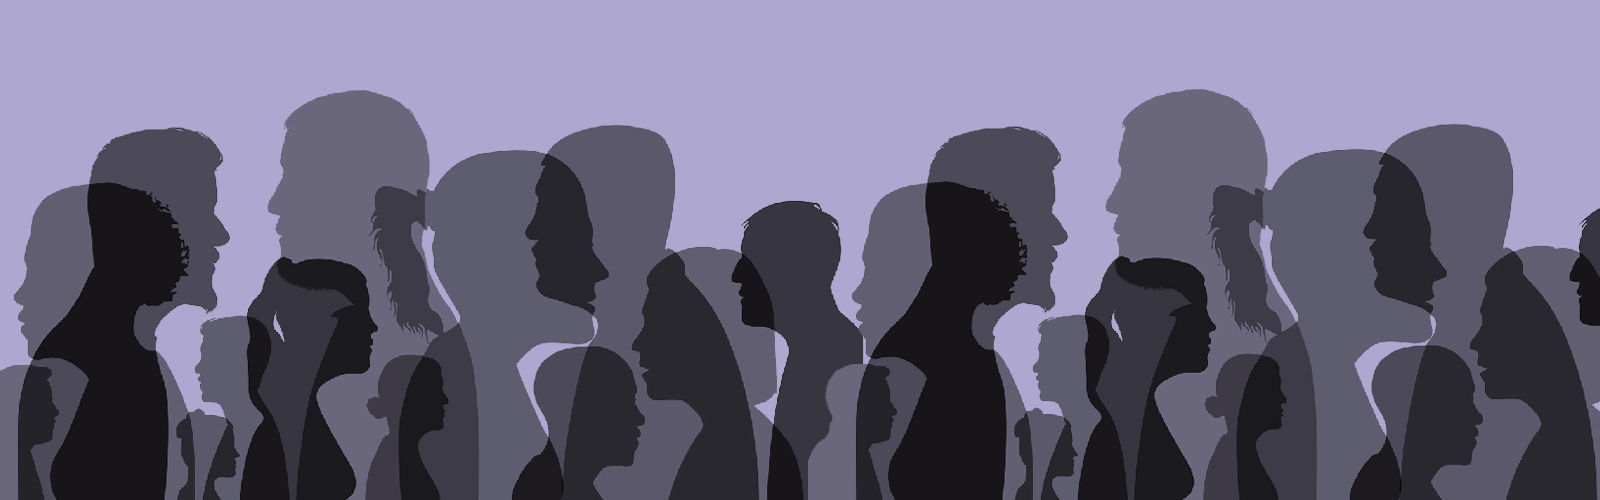 Silhouettes of peoples heads